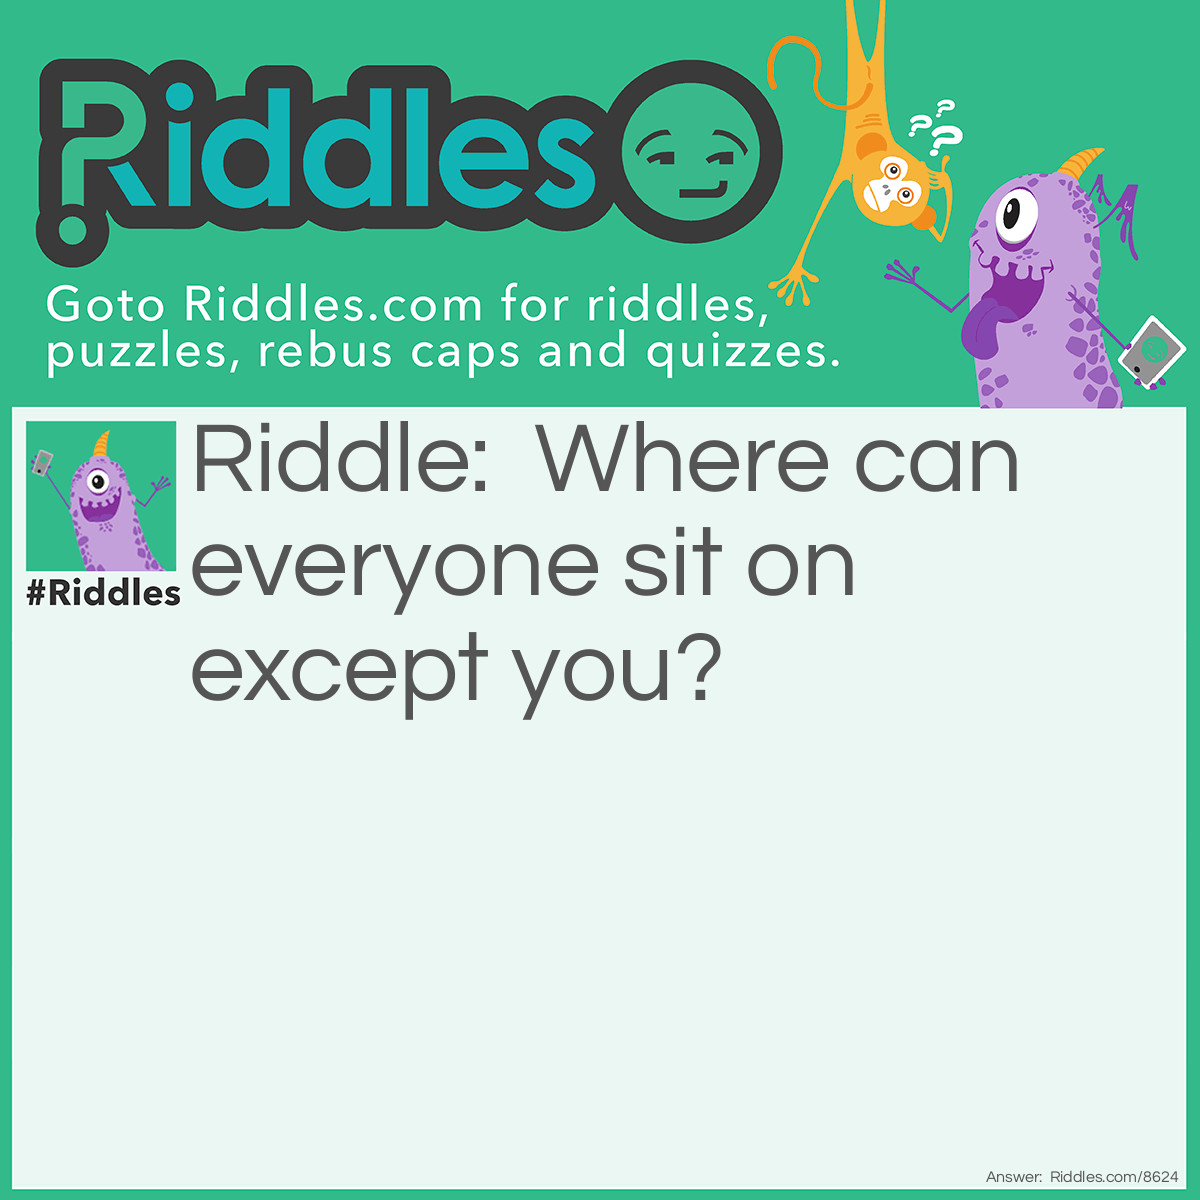 Riddle: Where can everyone sit on except you? Answer: Your lap.